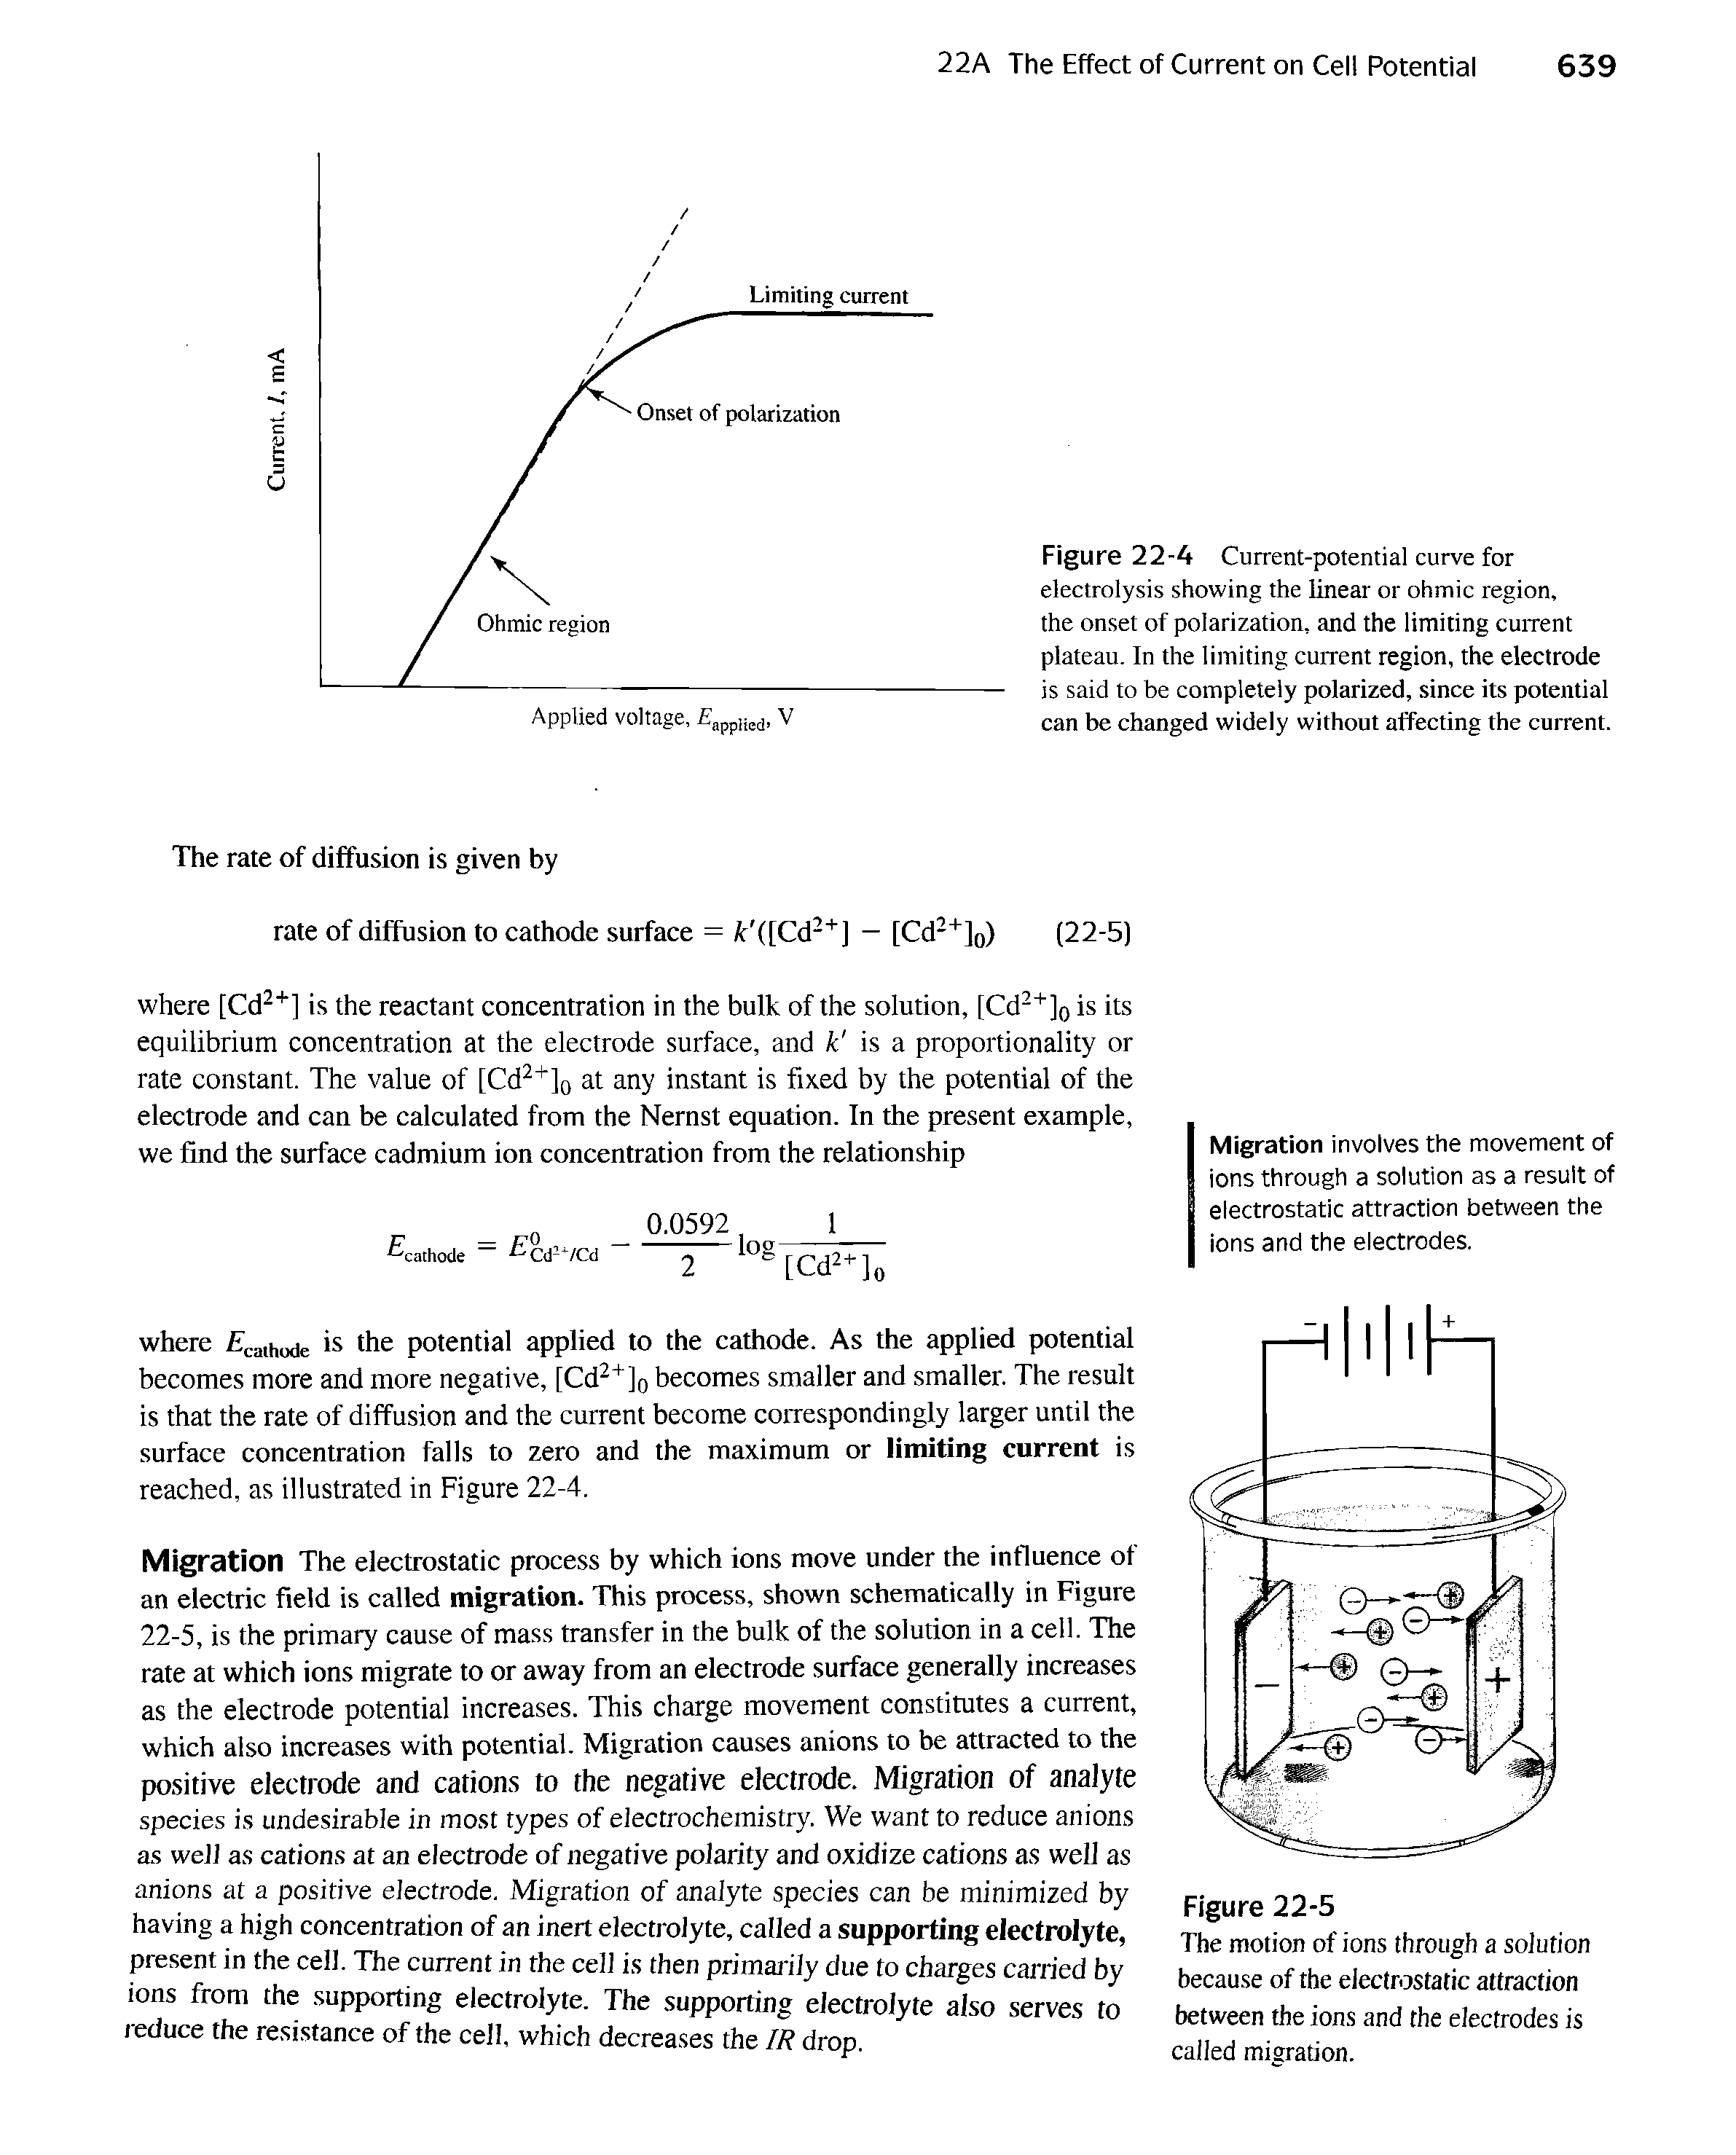 Figure 22-4 Current-potential curve for electrolysis showing the linear or ohmic region, the onset of polarization, and the limiting cuirent plateau. In the limiting current region, the electrode is said to be completely polarized, since its potential can be changed widely without affecting the current.